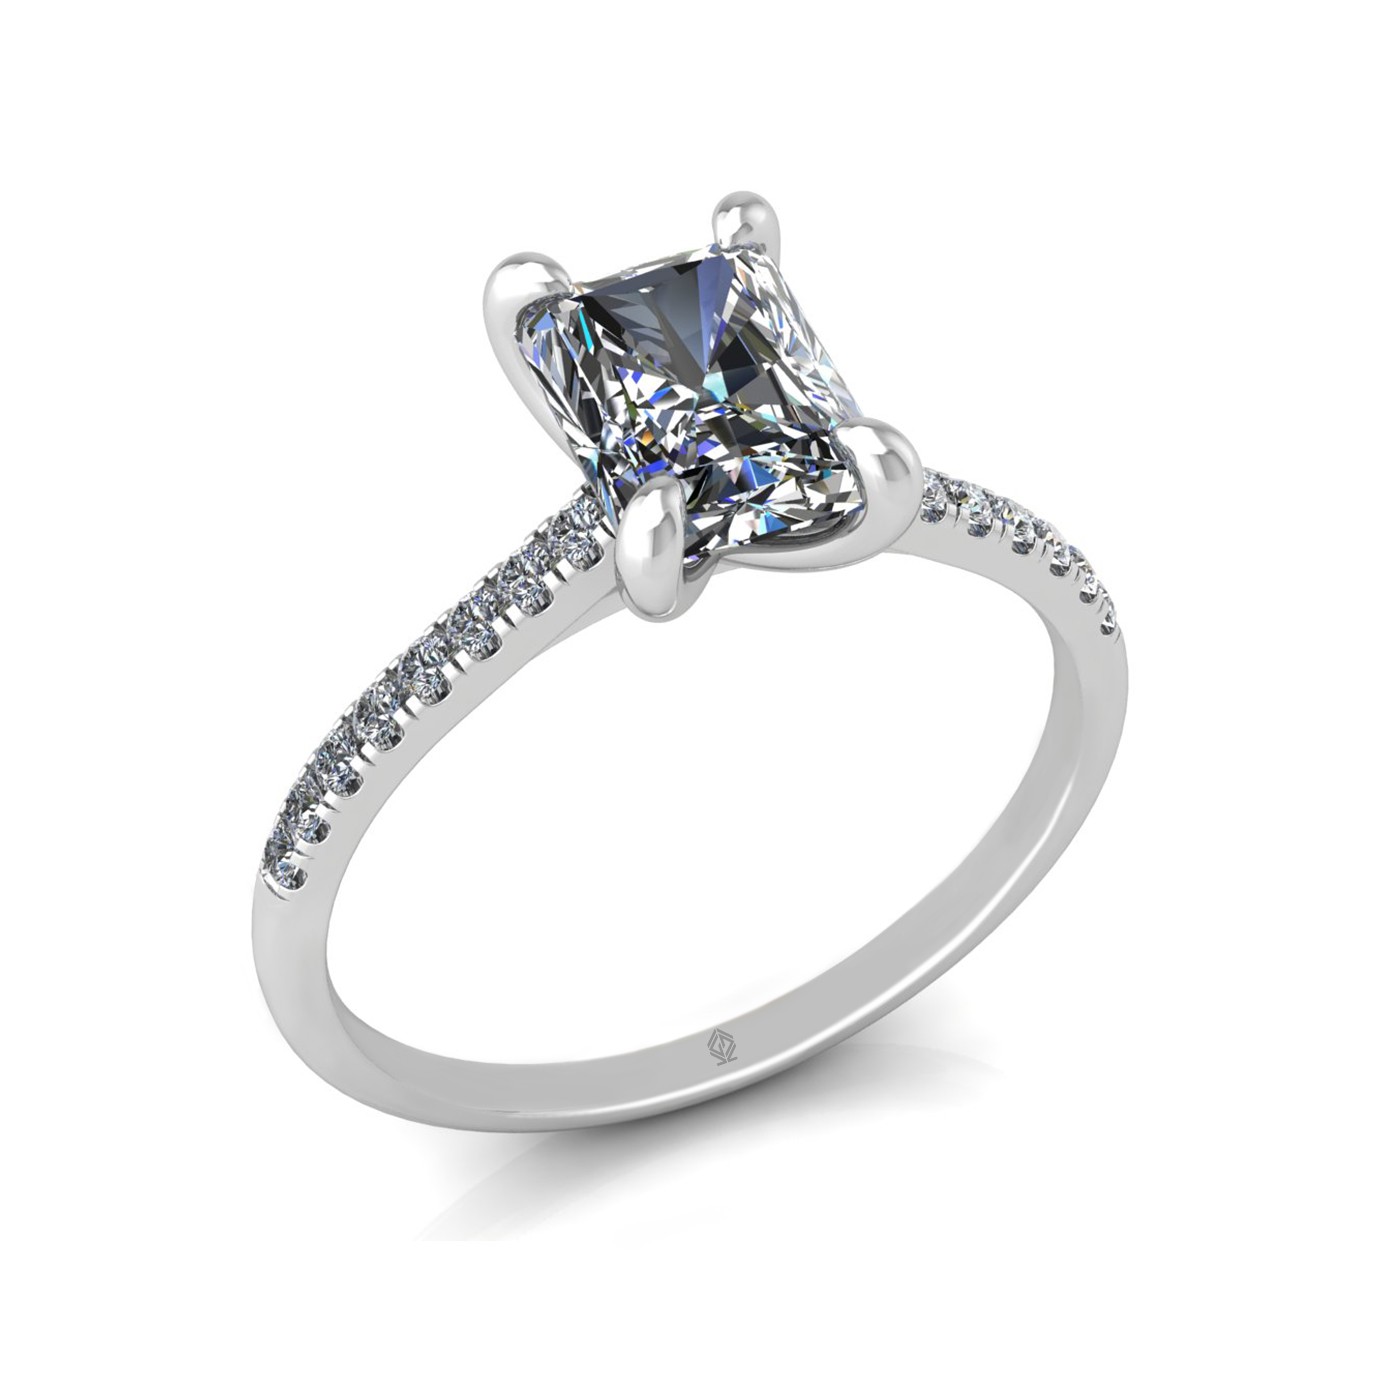 18k white gold  1,50 ct 4 prongs radiant cut diamond engagement ring with whisper thin pavÉ set band